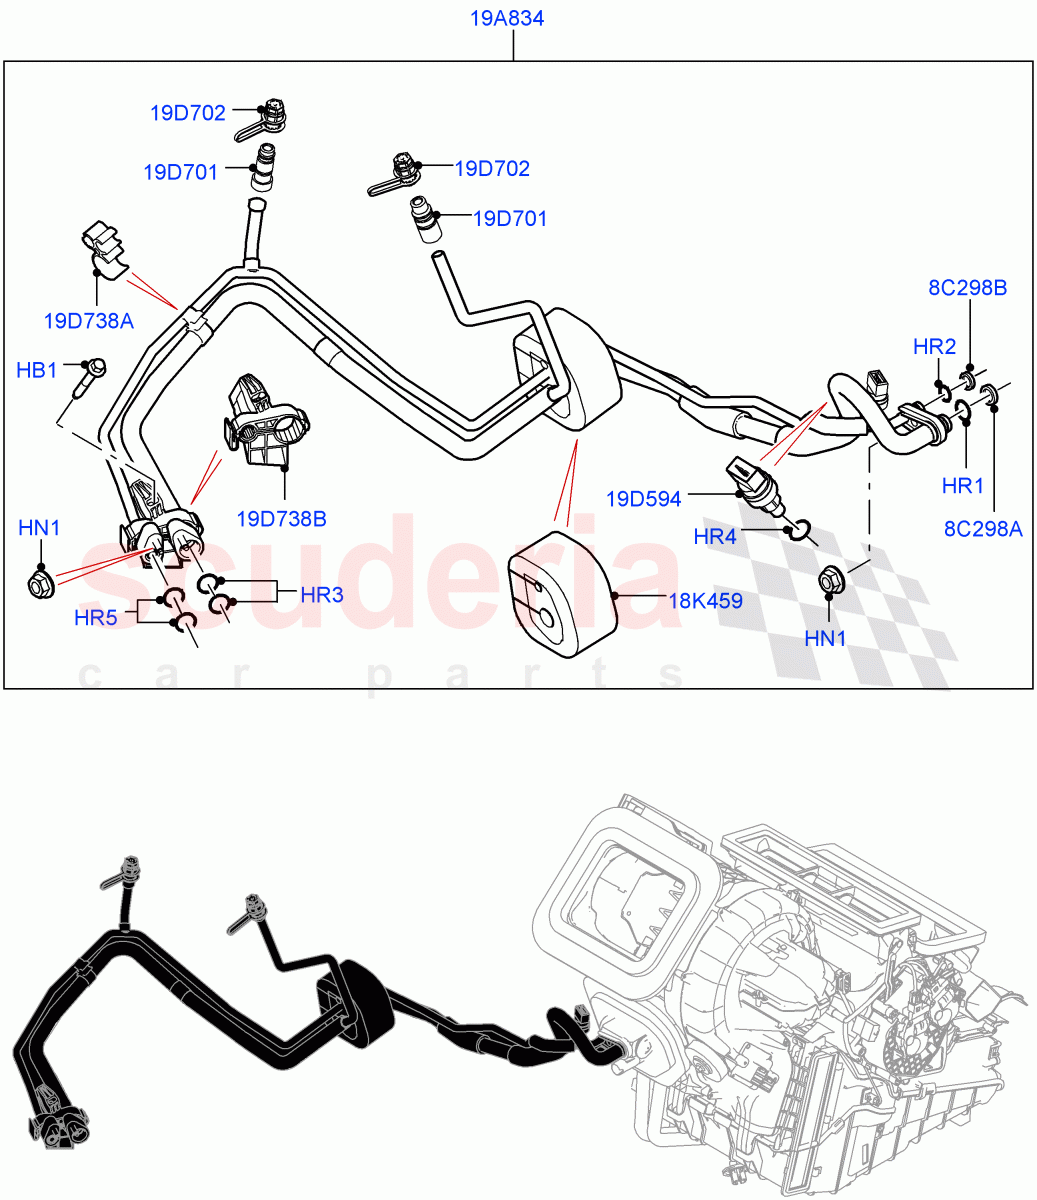 Air Conditioning System(Halewood (UK),Less Chiller Unit,Air Conditioning Refrigerant-R134A)((V)FROMGH000001,(V)TOKH999999) of Land Rover Land Rover Discovery Sport (2015+) [2.0 Turbo Petrol AJ200P]